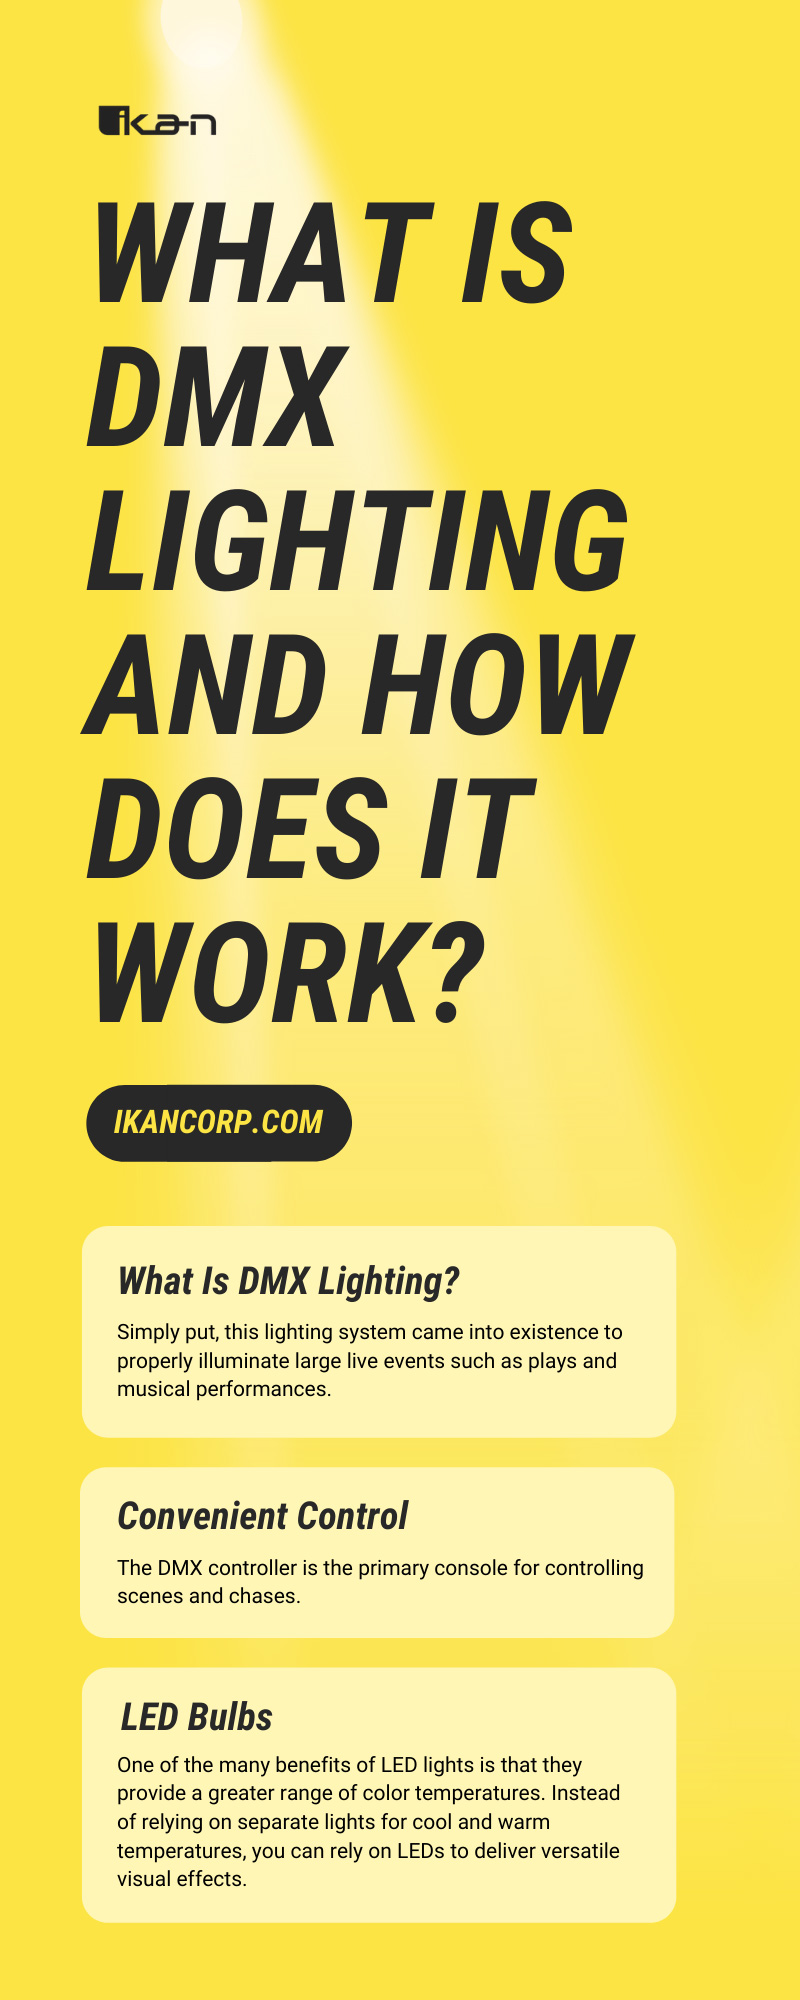 What Is DMX Lighting and How Does It Work?